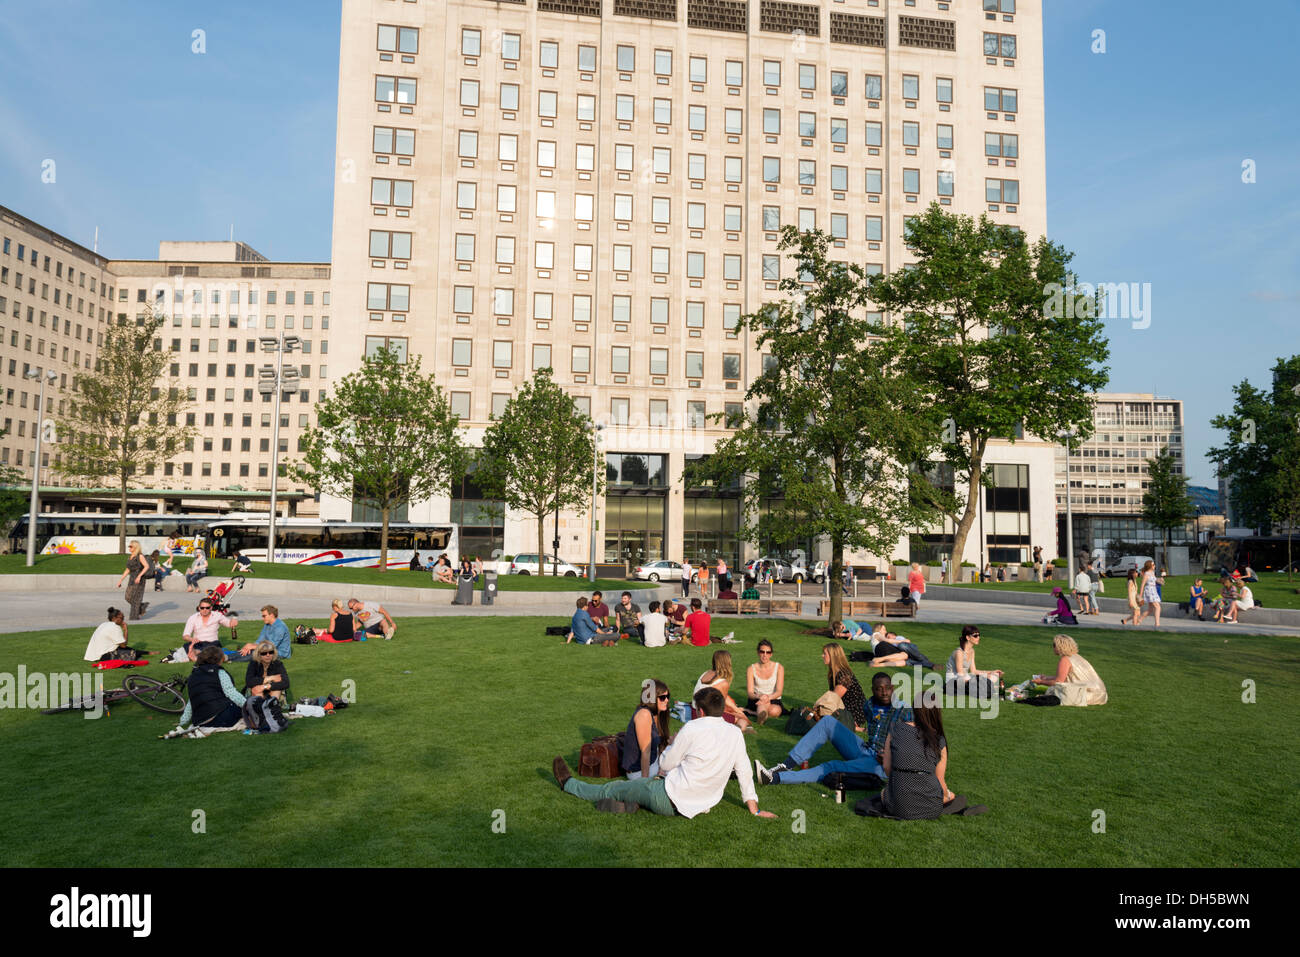 People relaxing in Jubilee Gardens on the South Bank, London, England, UK Stock Photo